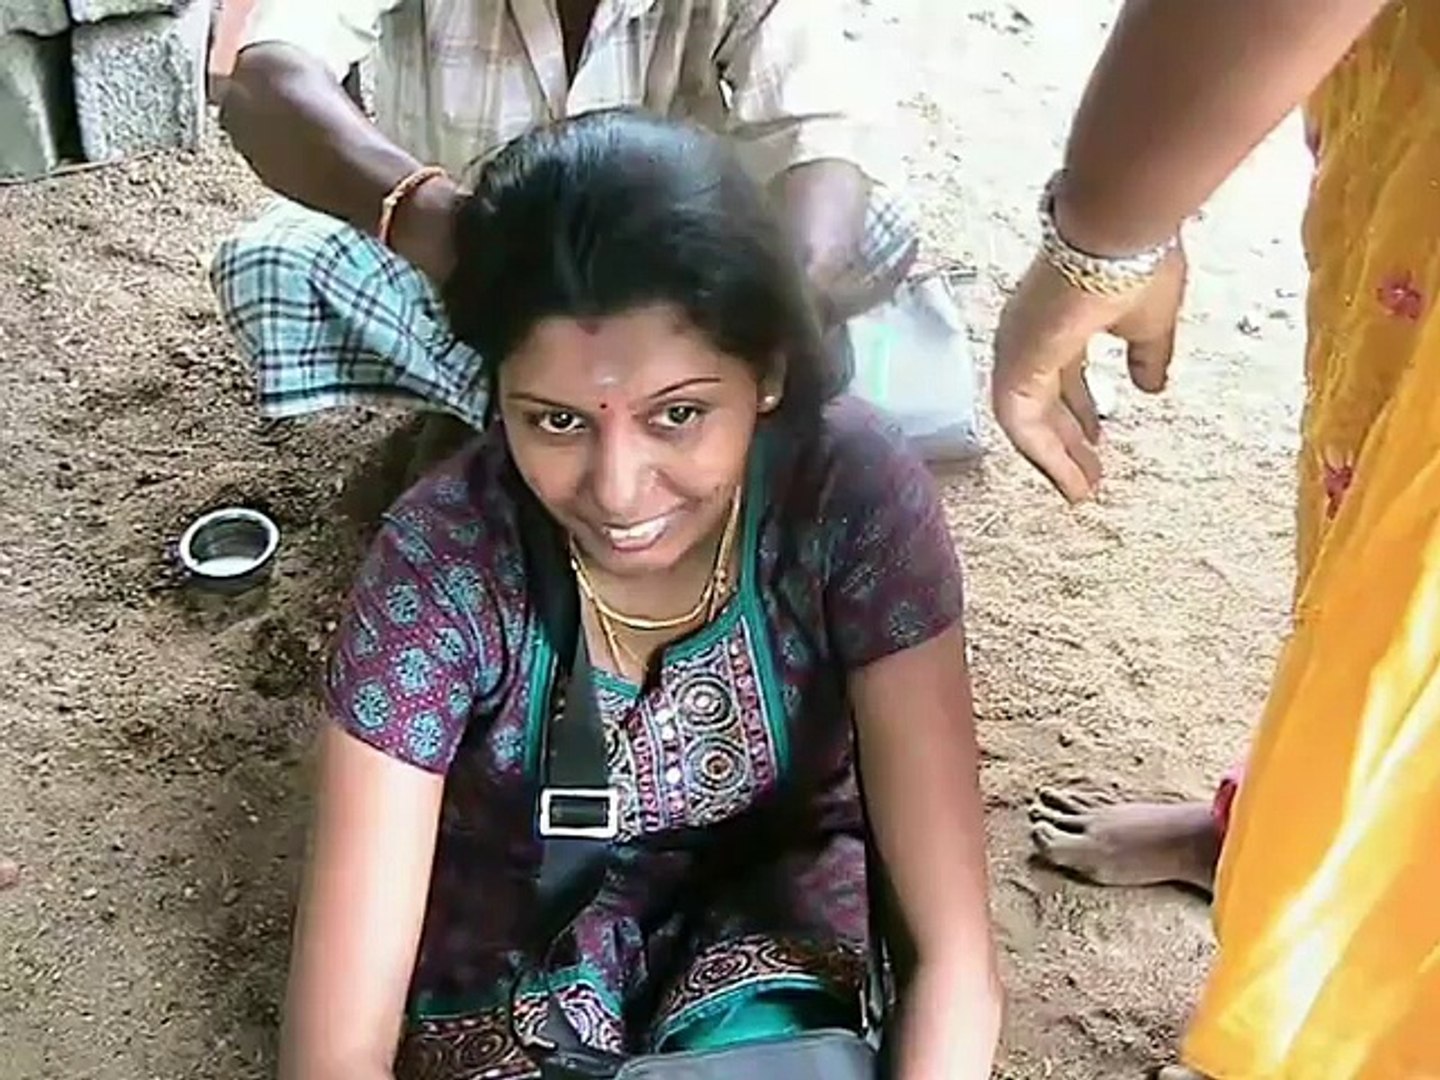 South indian Lady hair cut from long to short HD - video Dailymotion